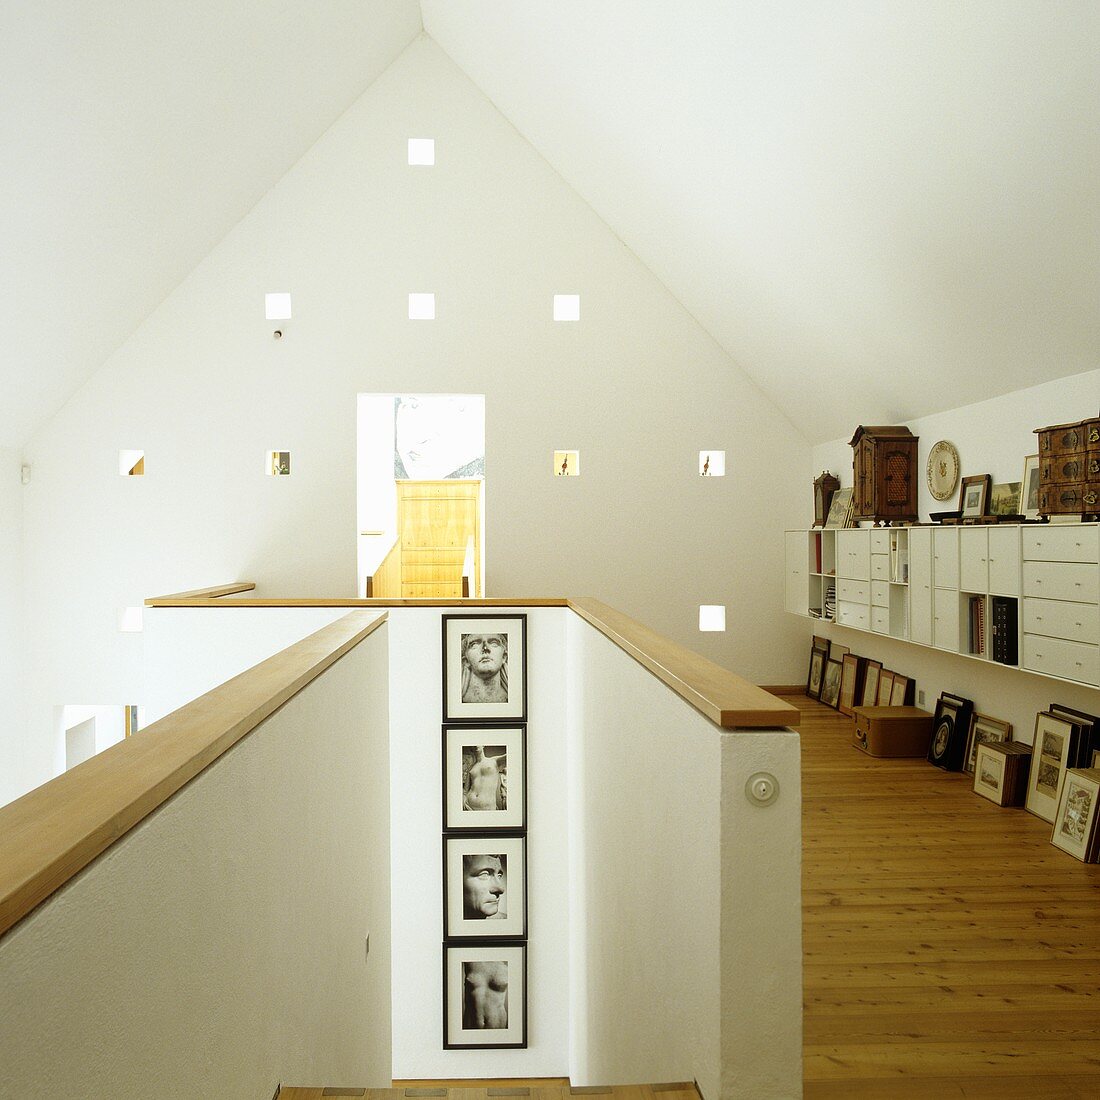 A house with an open stairway and a gallery with a view on a gable wall